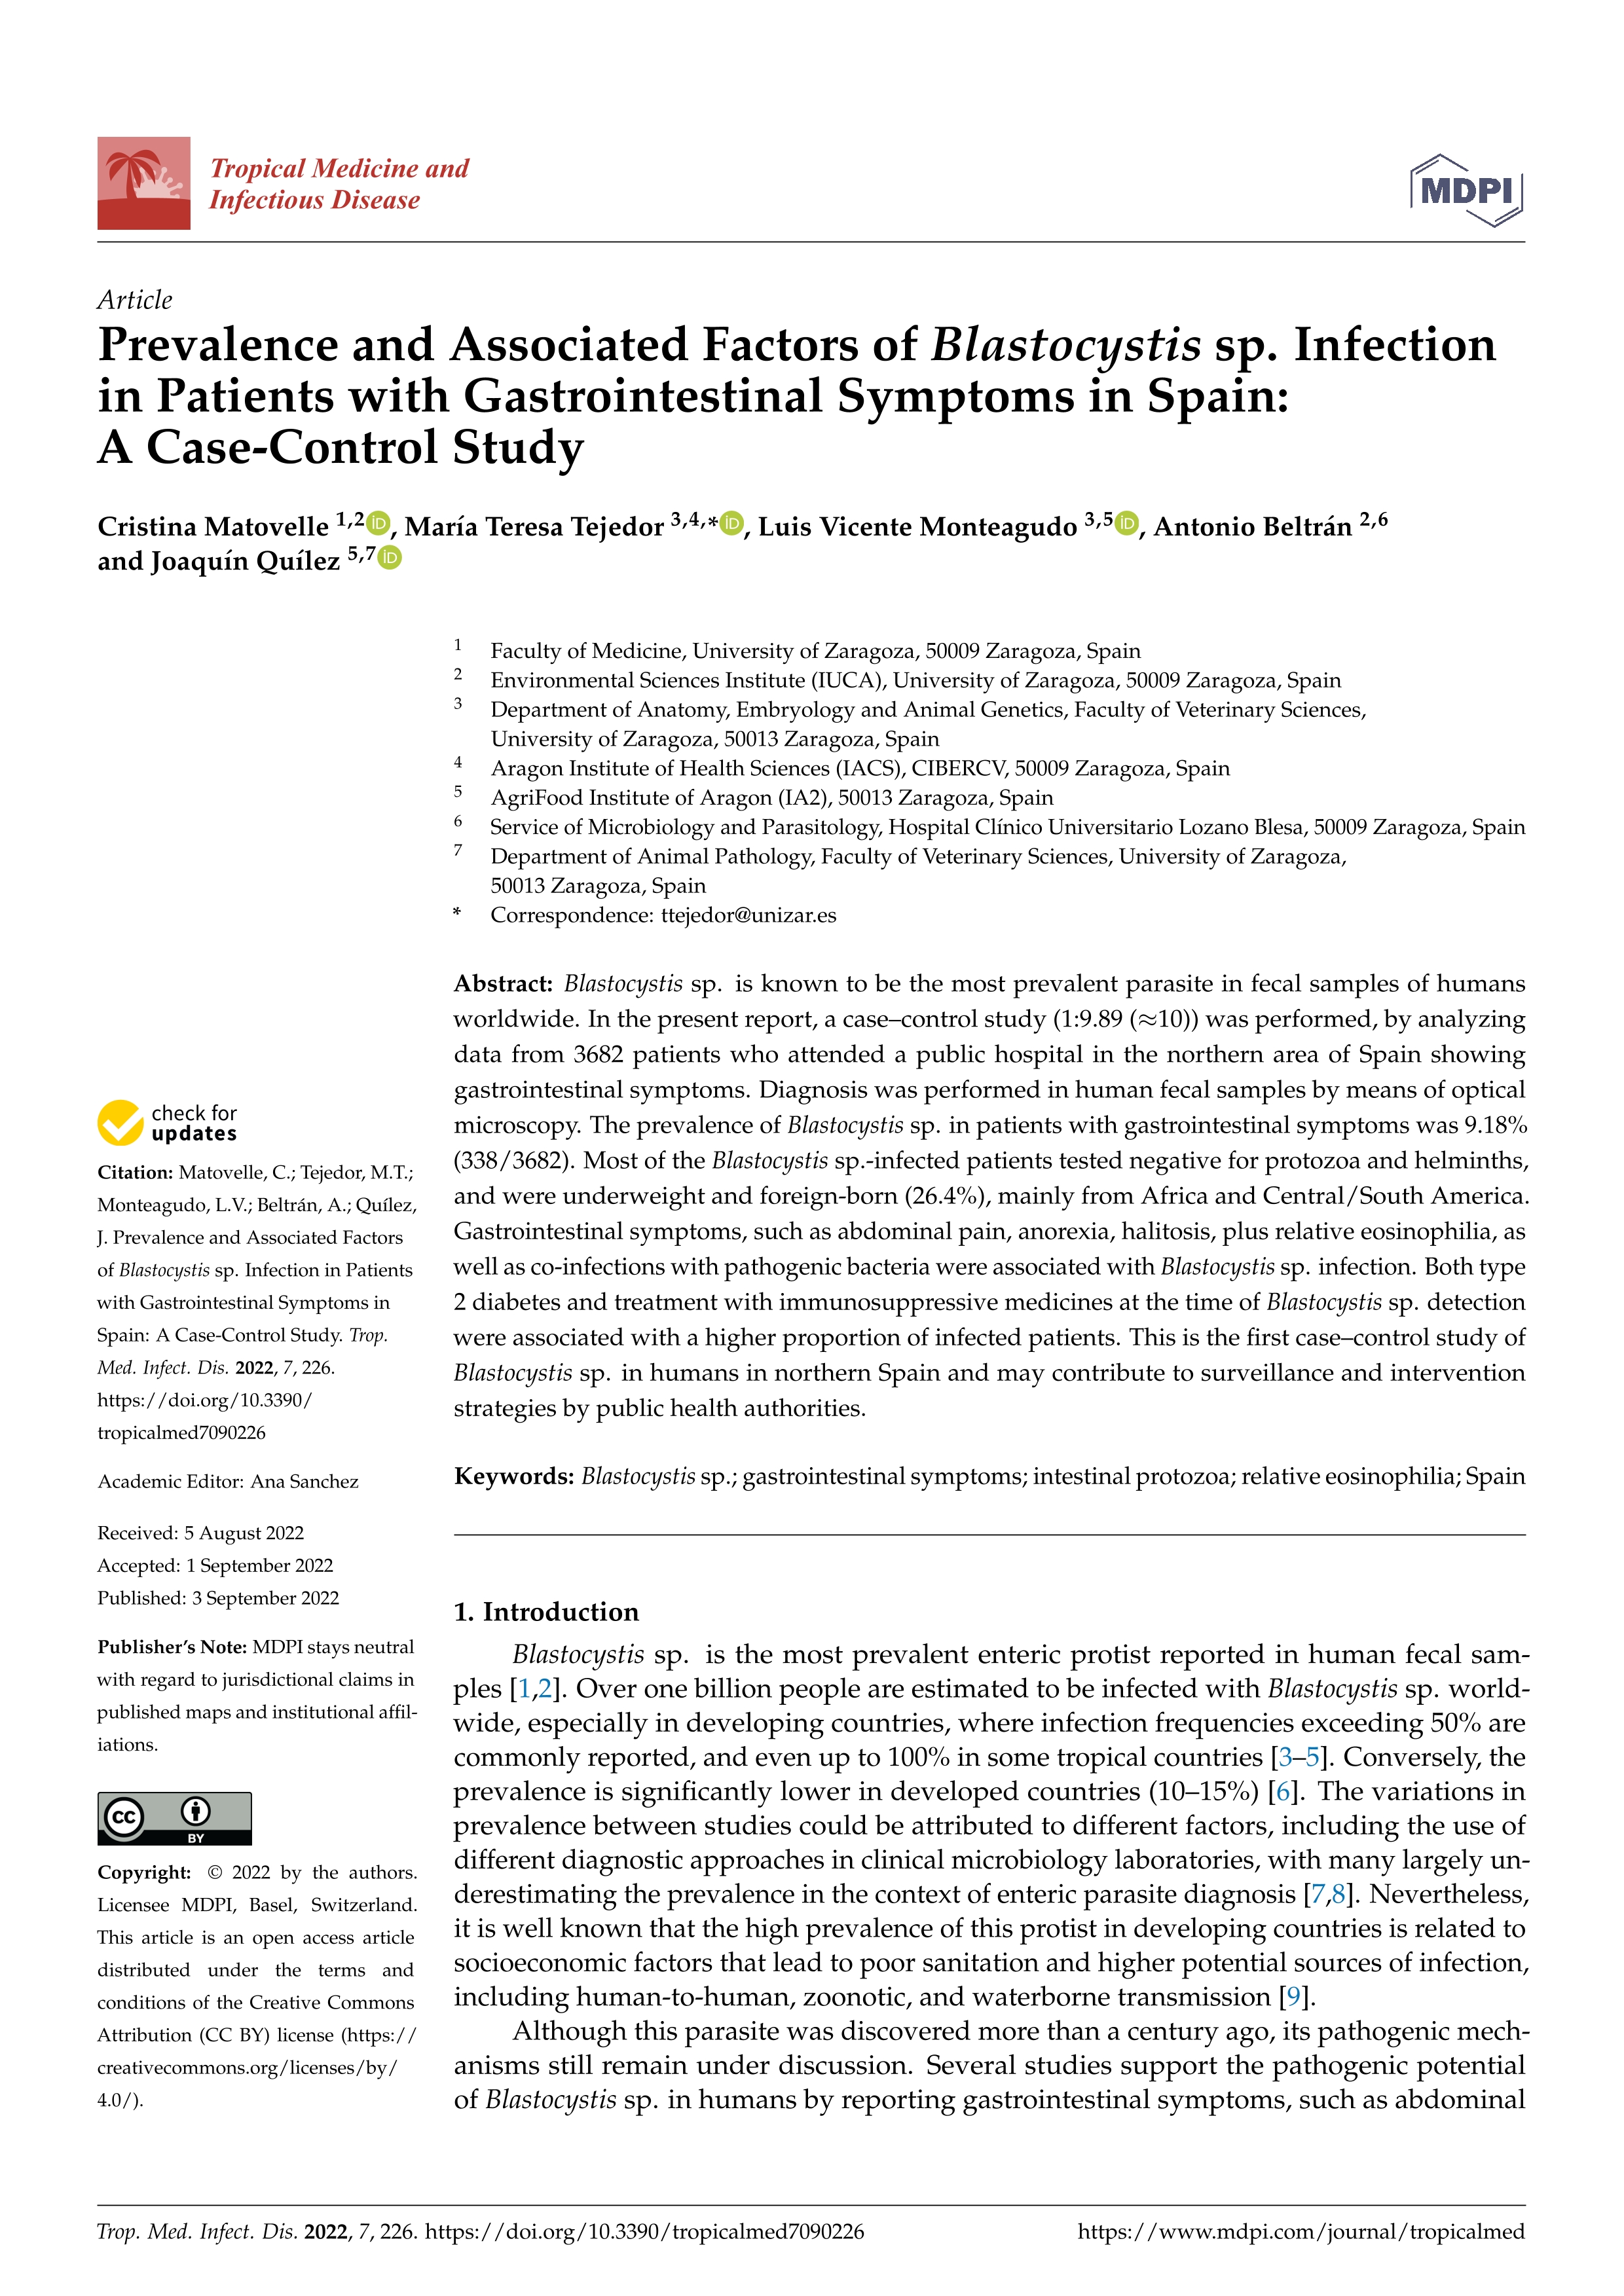 Prevalence and Associated Factors of Blastocystis sp. Infection in Patients with Gastrointestinal Symptoms in Spain: A Case-Control Study